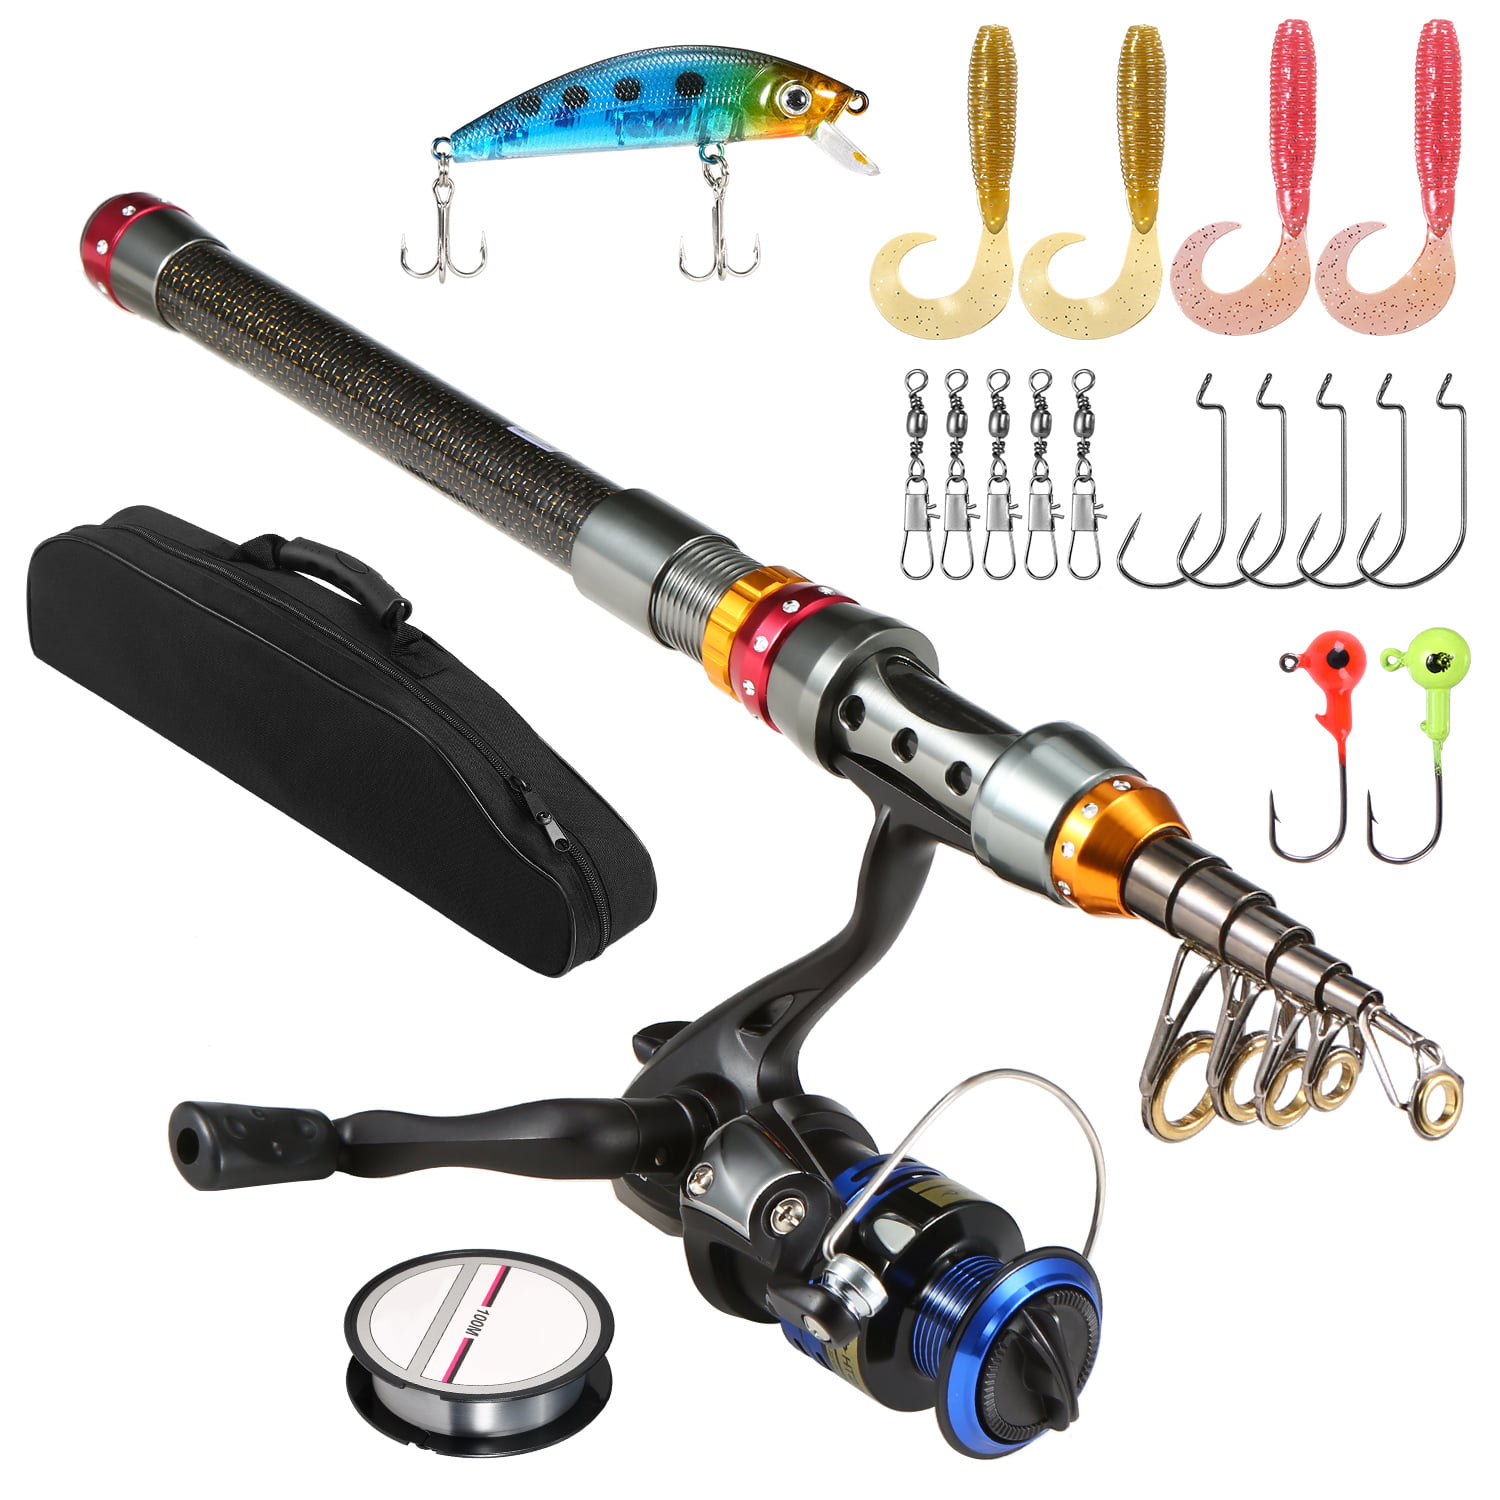 Spinning Fishing Reel Gear Organizer Pole Set with 100M Fishing Line Lures Hooks and Fishing Carrier Bag Case Fishing Accessories Lixada Telescopic Fishing Rod and Reel Combo Full Kit 